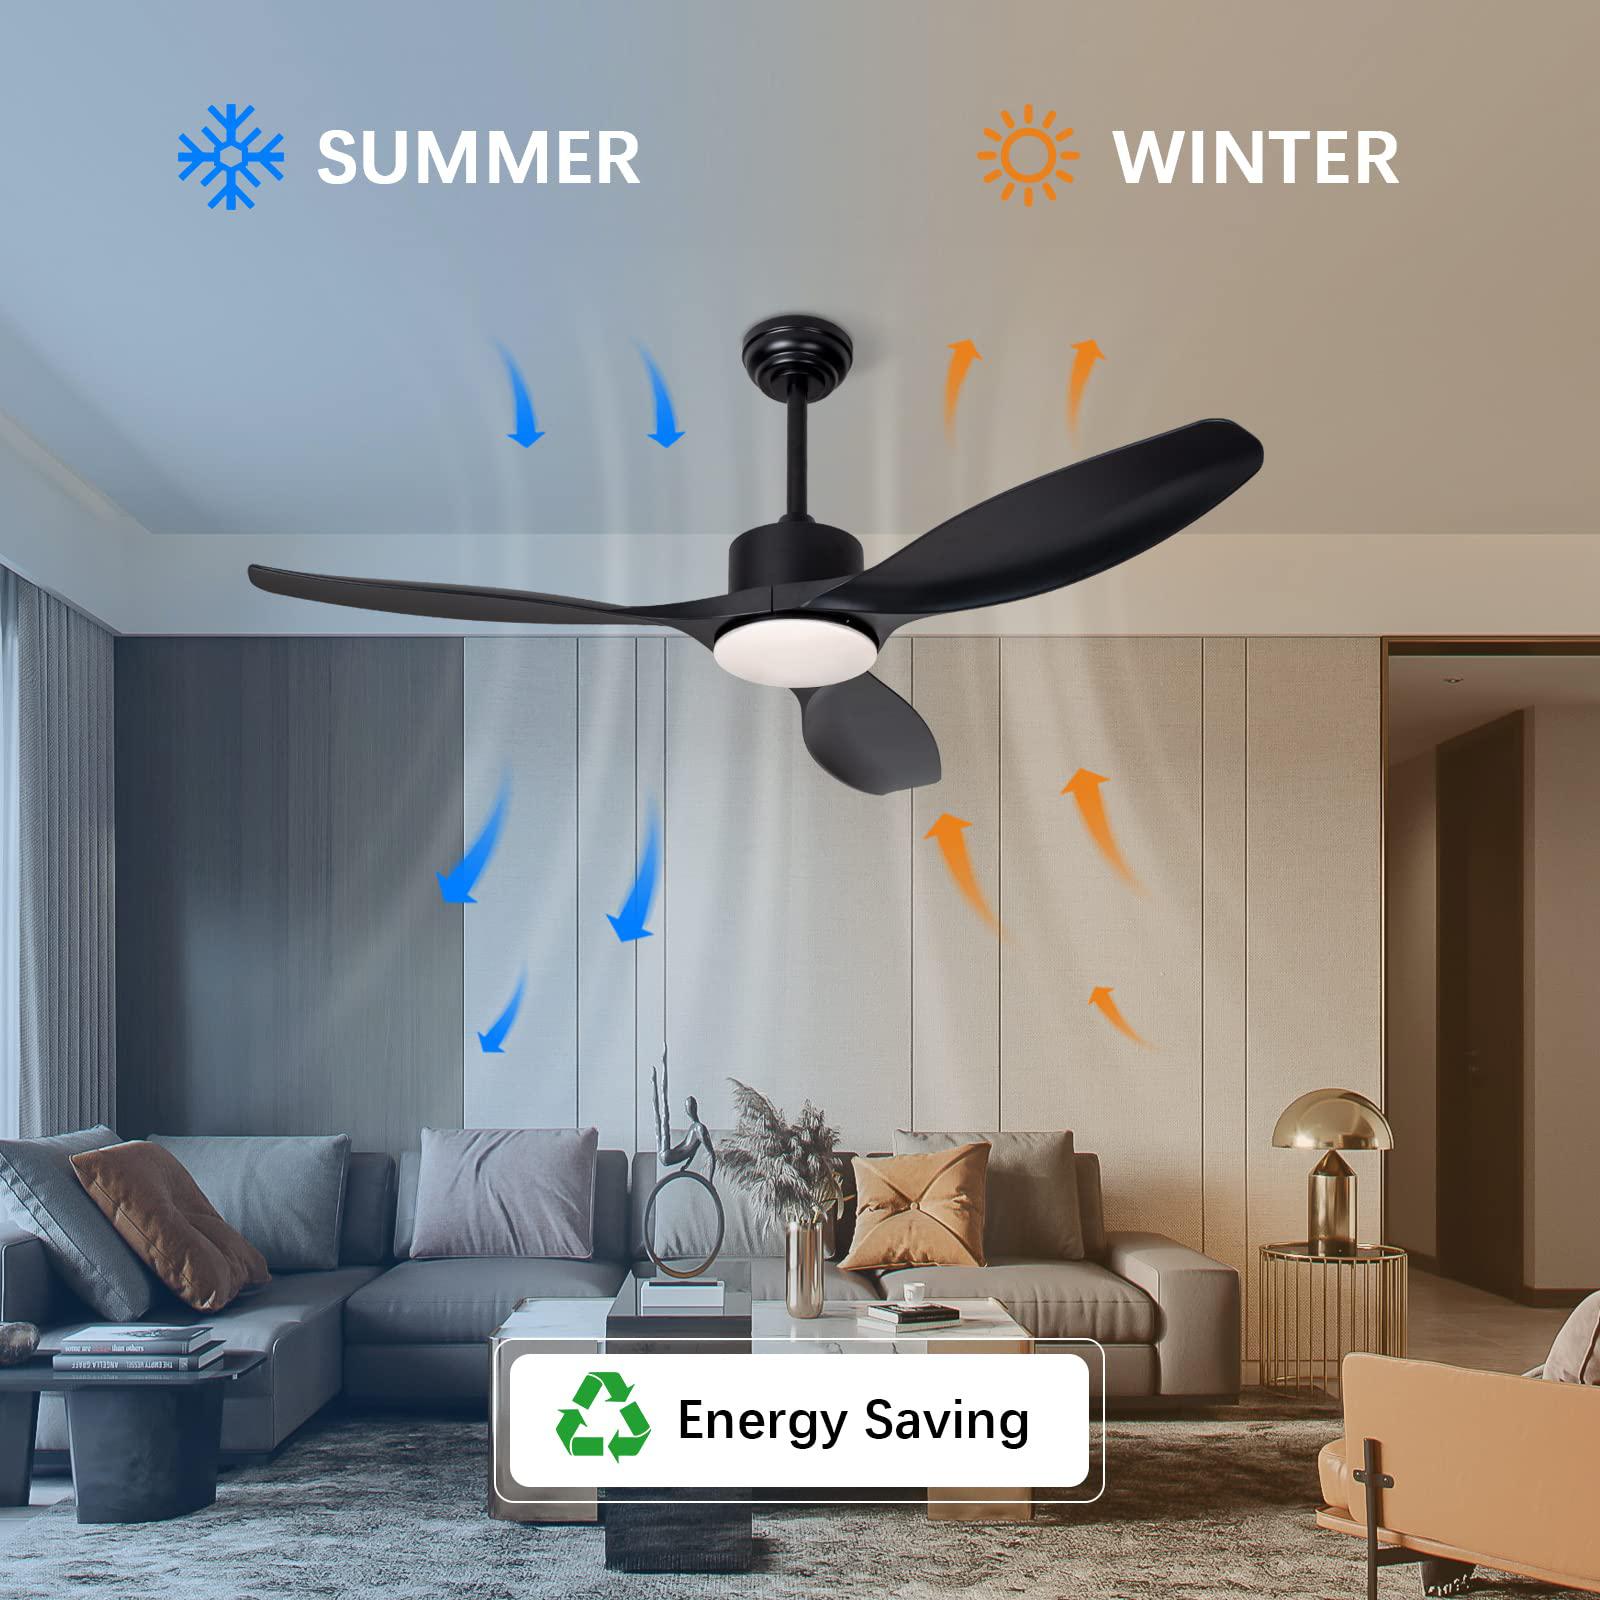 wozzio ceiling fan 52" ceiling fans with lights remote control,black ceiling fan 3cct 22w dimmable led light,3 reversible bla